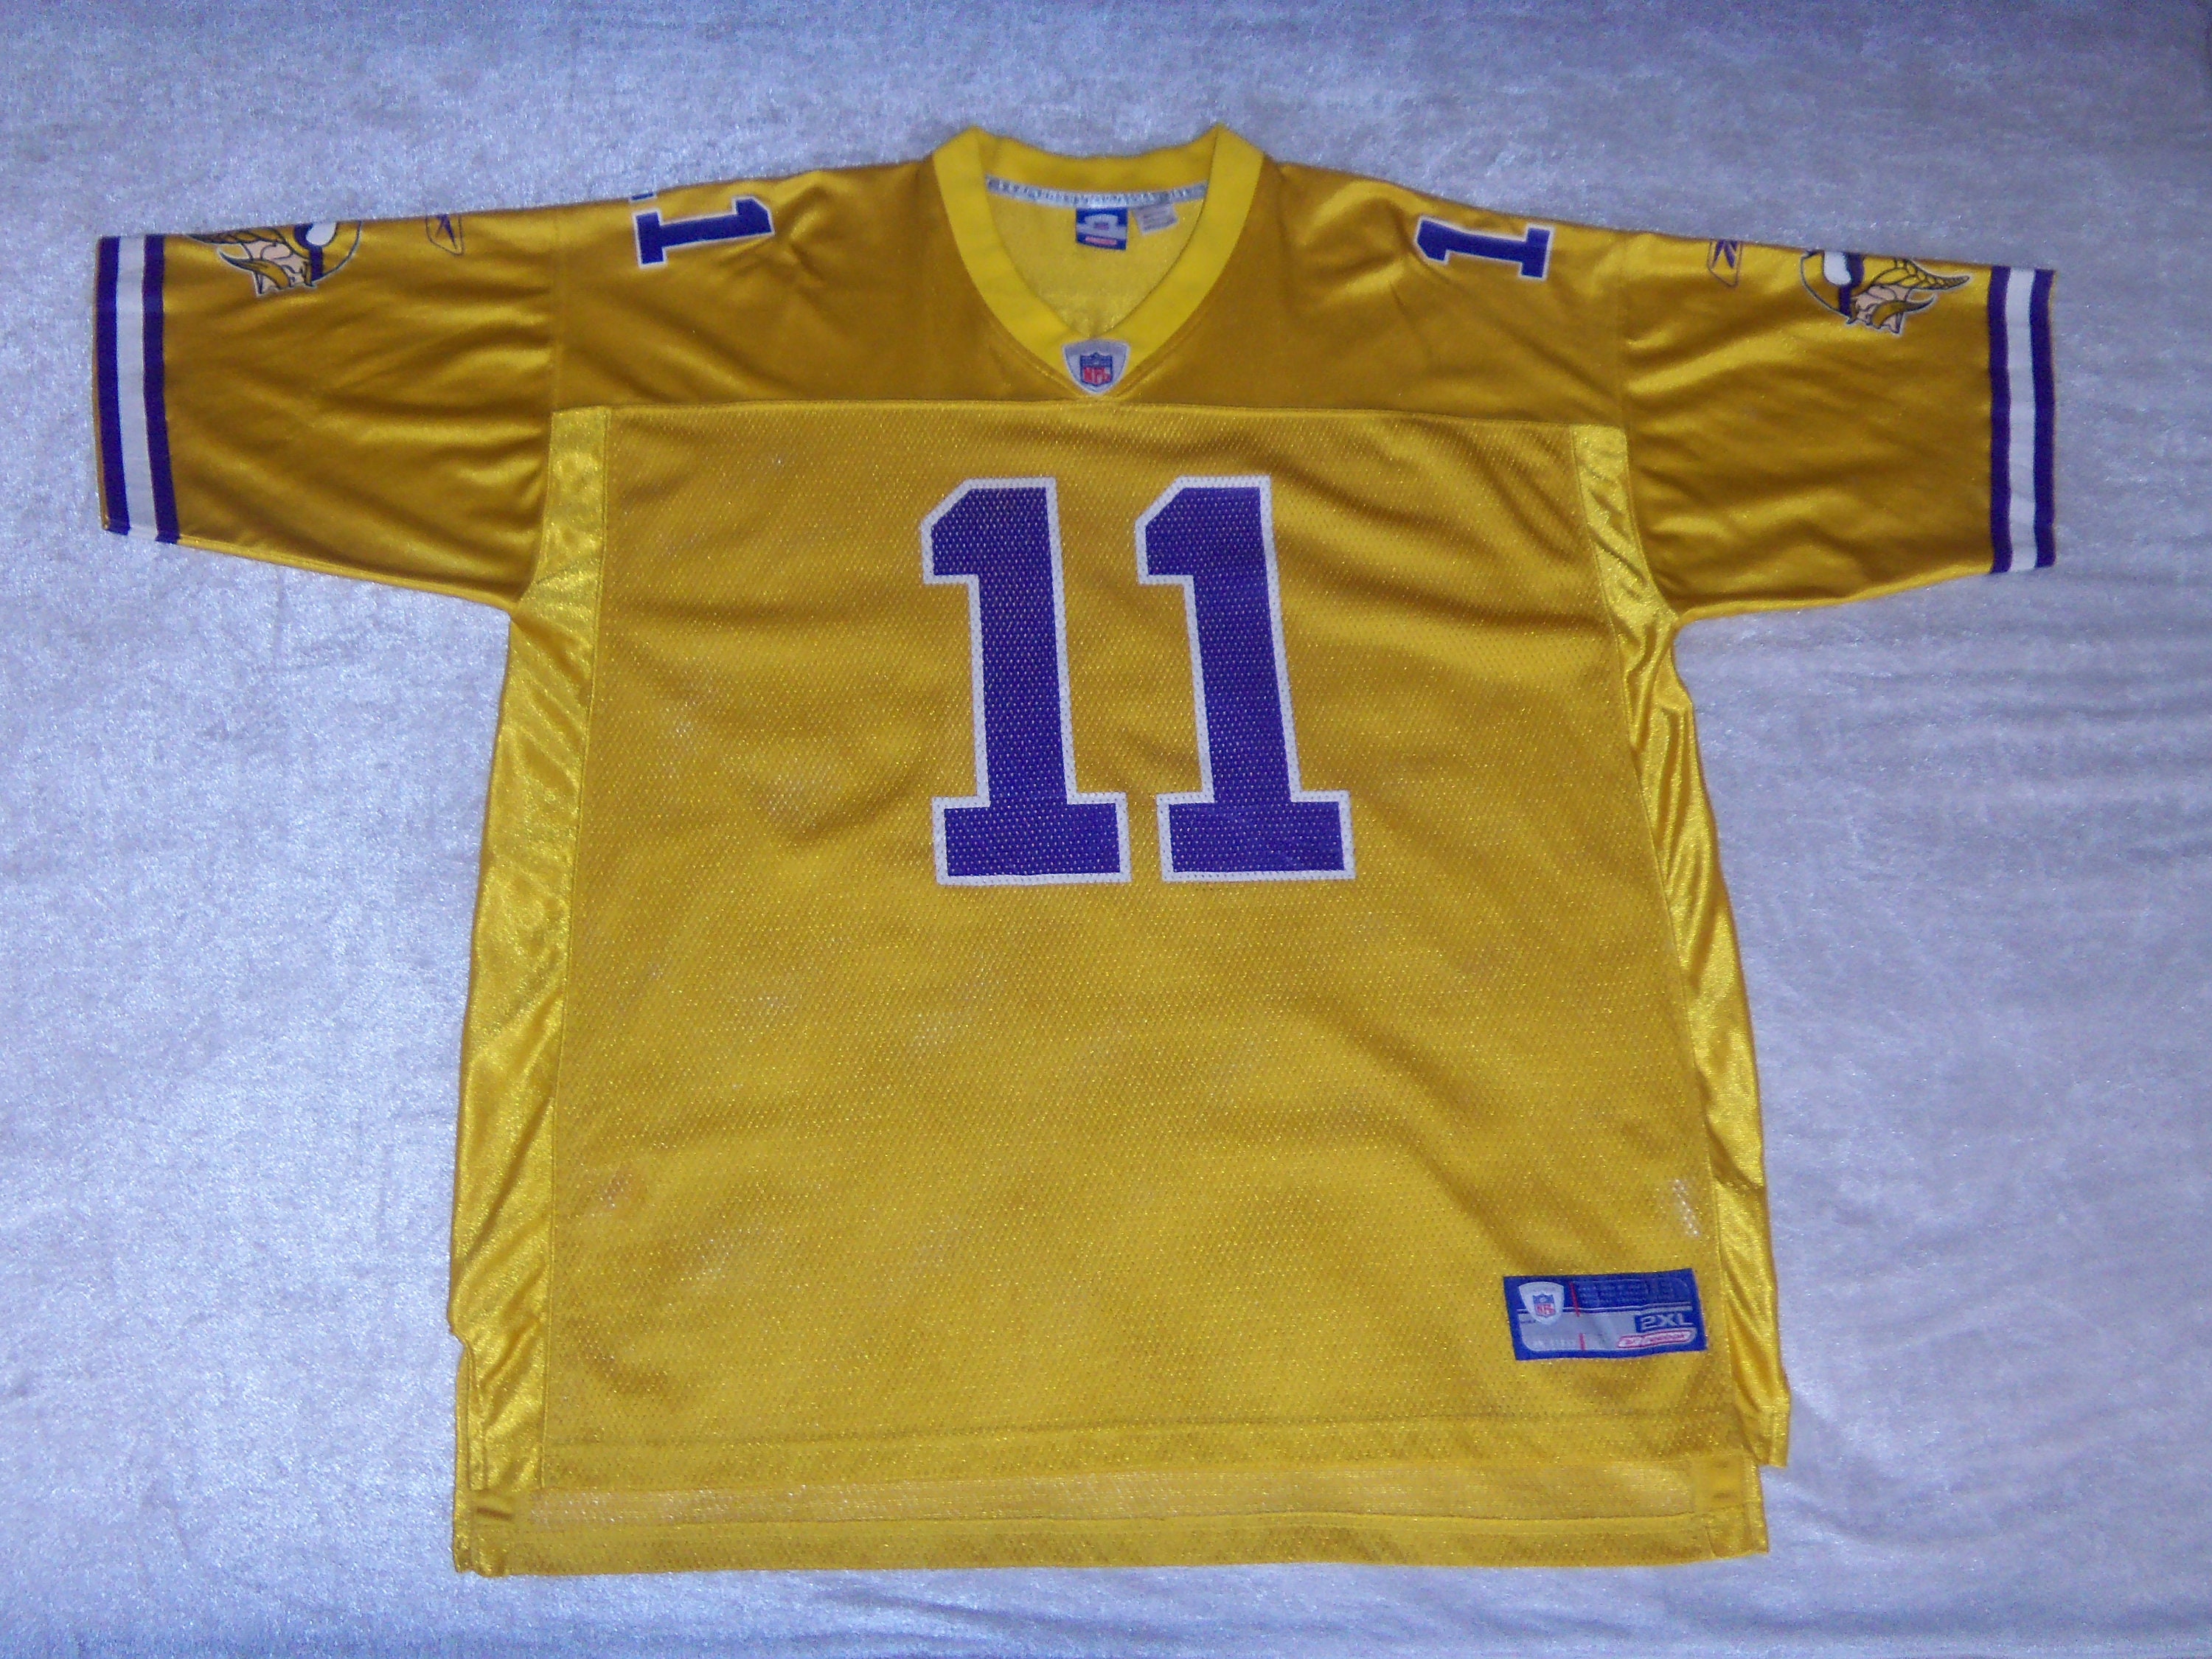 KENNY PICKETT #8 Steelers Home Replica Game nike Football Jersey 2XL New  issue